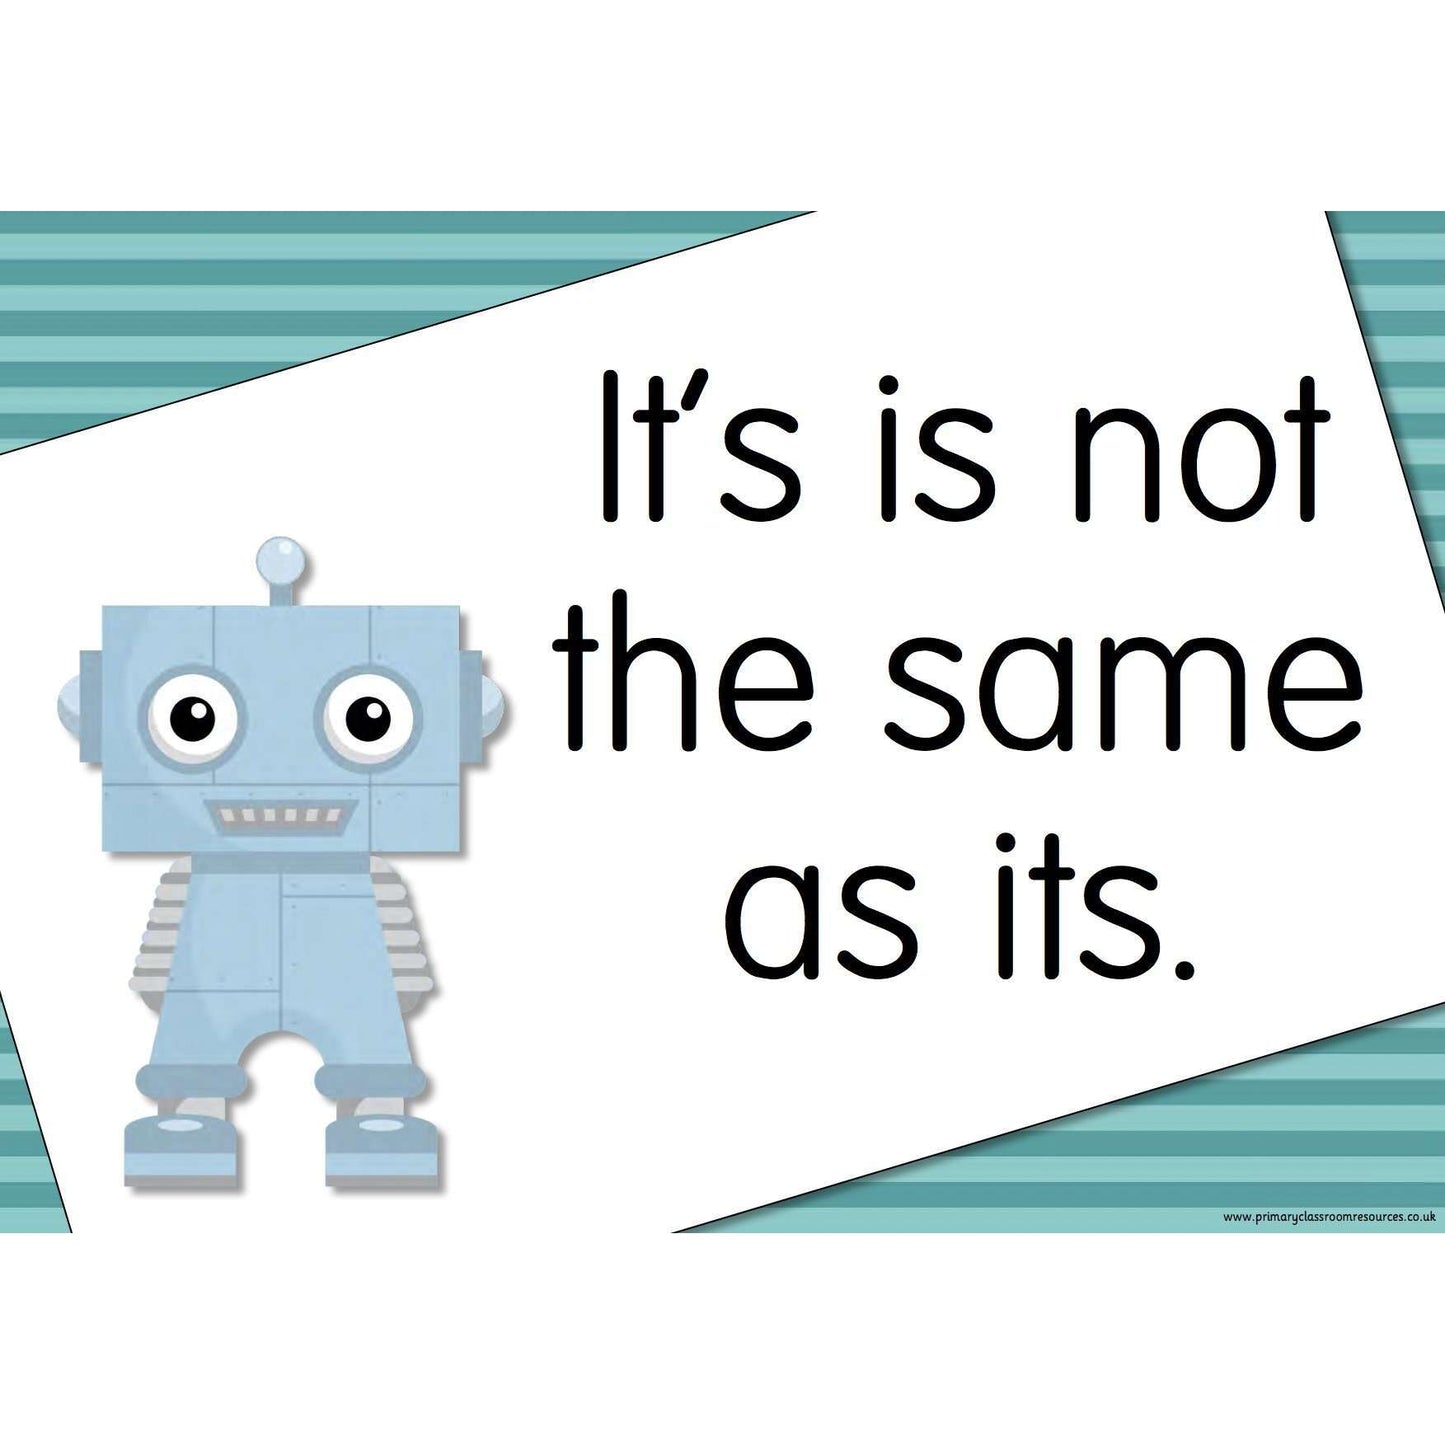 A3 Laminated - The GrammarBots Posters:Primary Classroom Resources